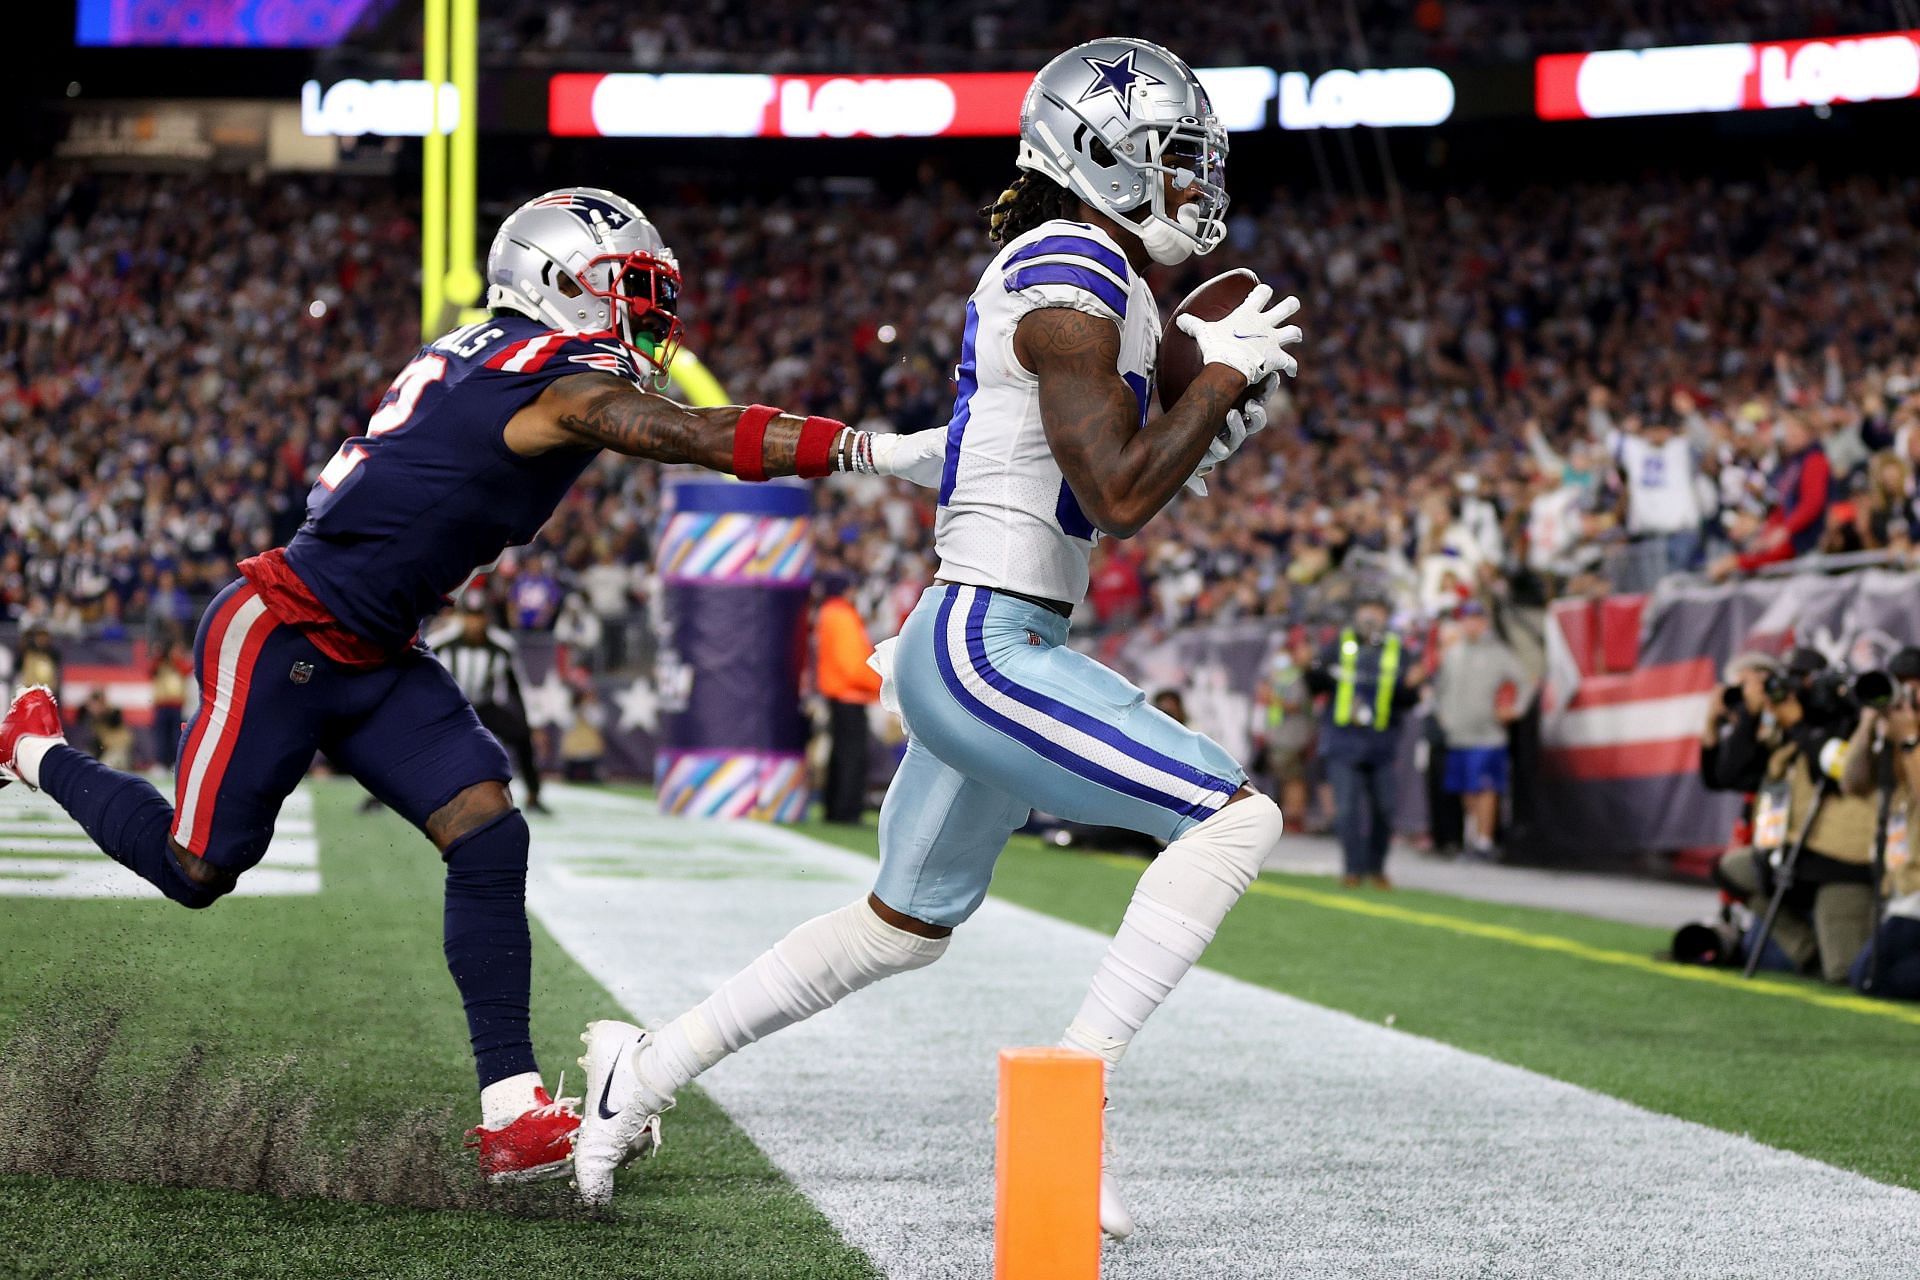 Most touchdowns by a workforce in NFL historical past: Cowboys rating 2,five hundredth TD vs. Patriots